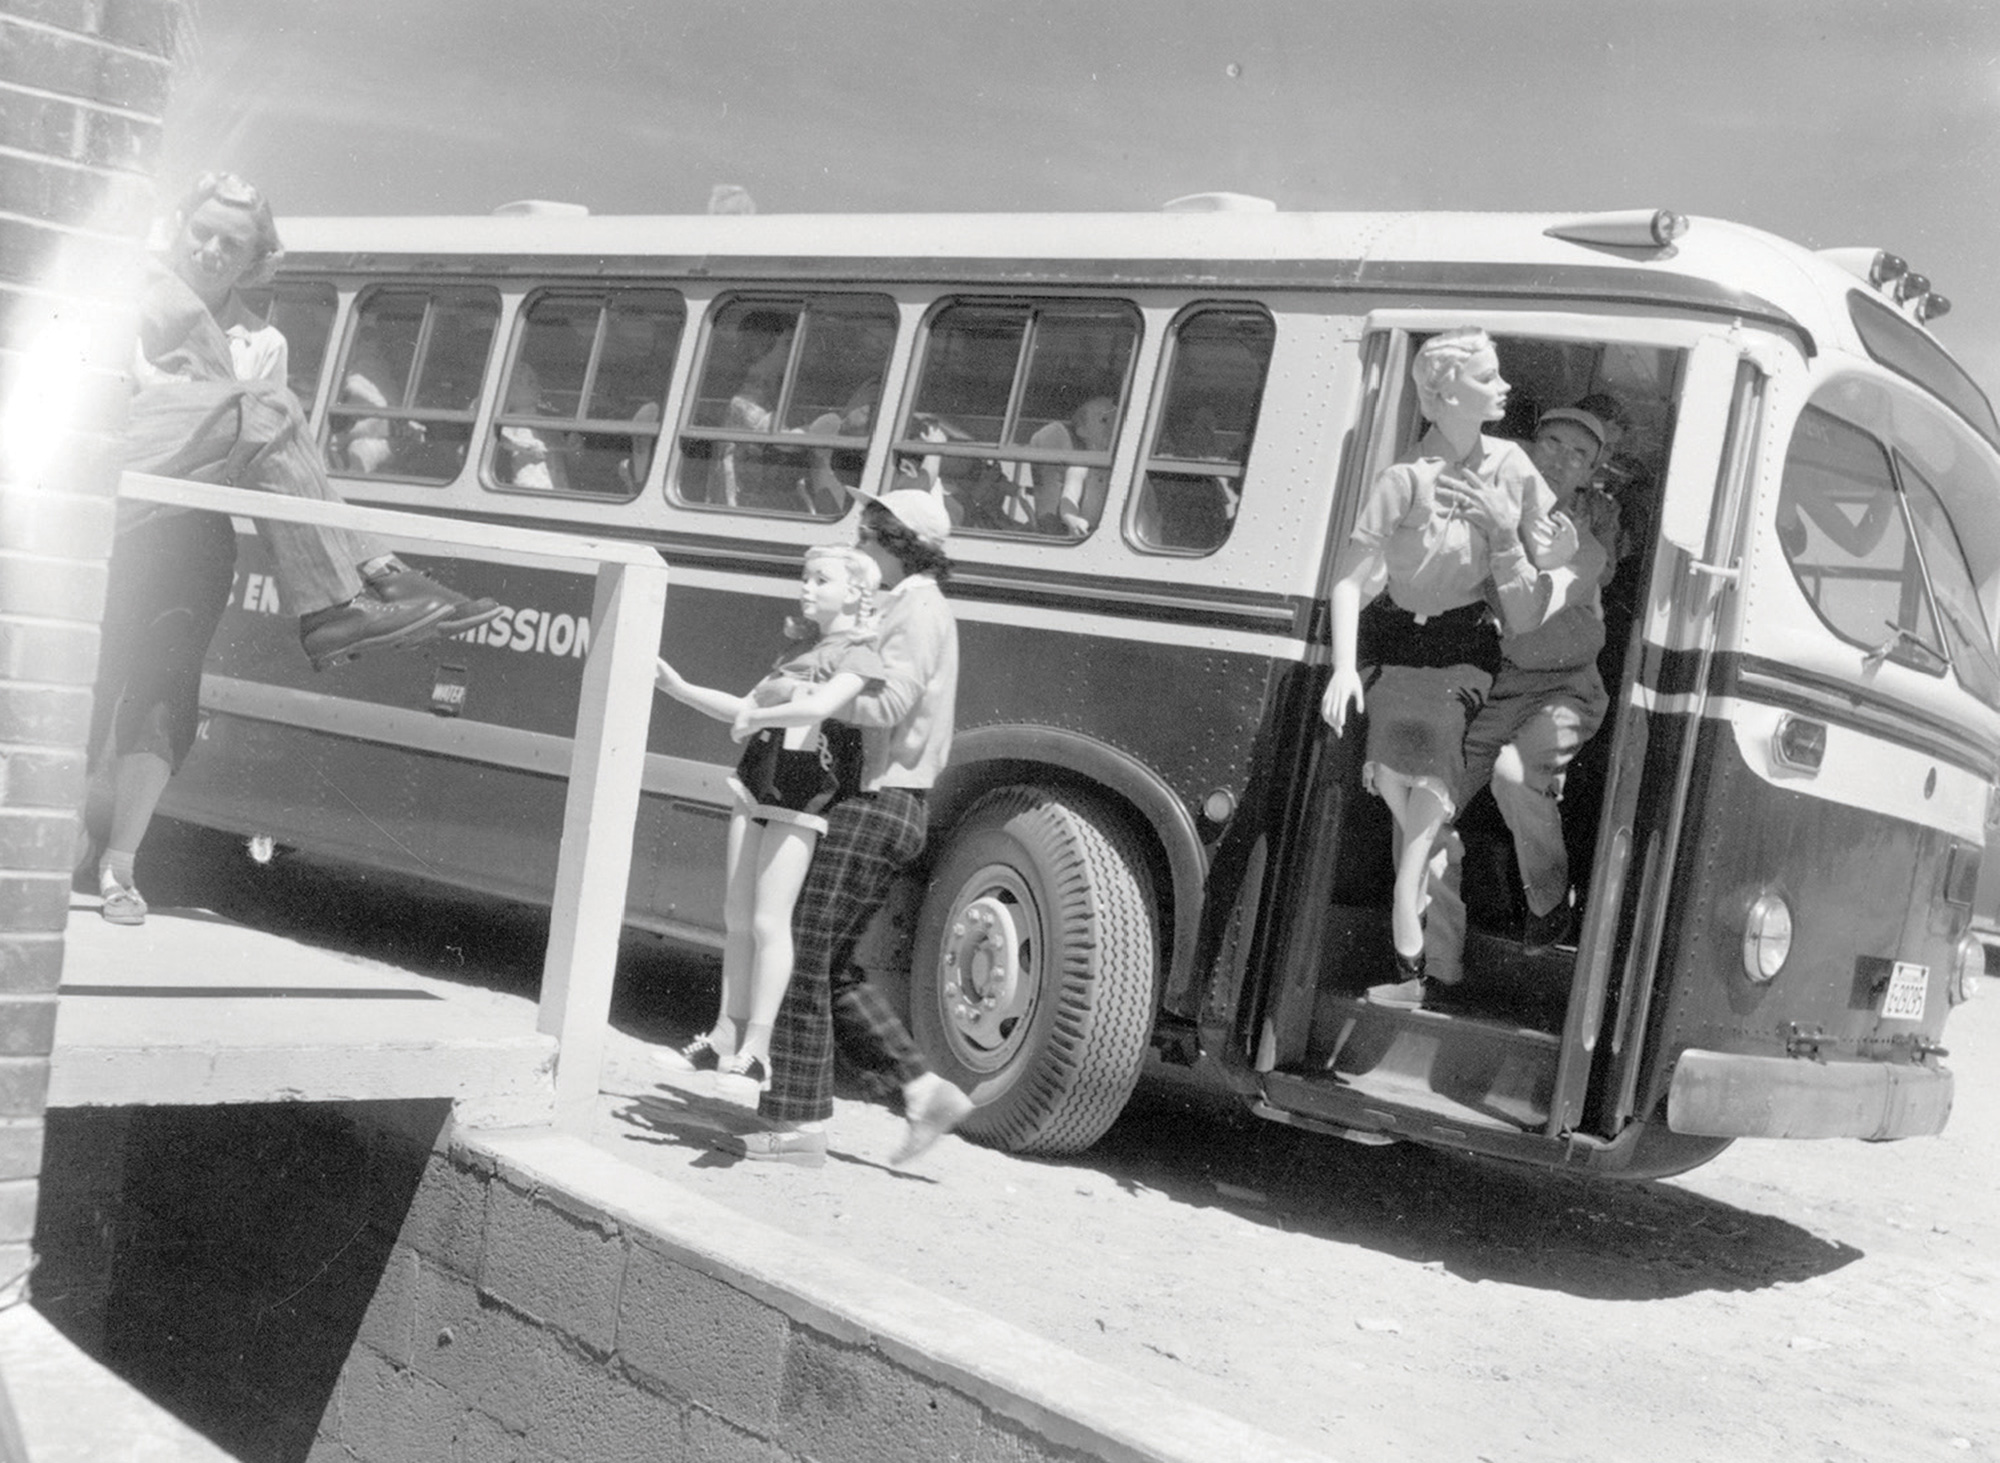 A photograph from Operation Cue, one of a series of tests conducted in the Nevada desert in 1955 in order to gauge the effects of nuclear bombs on various types of edifices. This photograph depicts a group of test dummies being taken off a bus in order to be placed in various model houses.